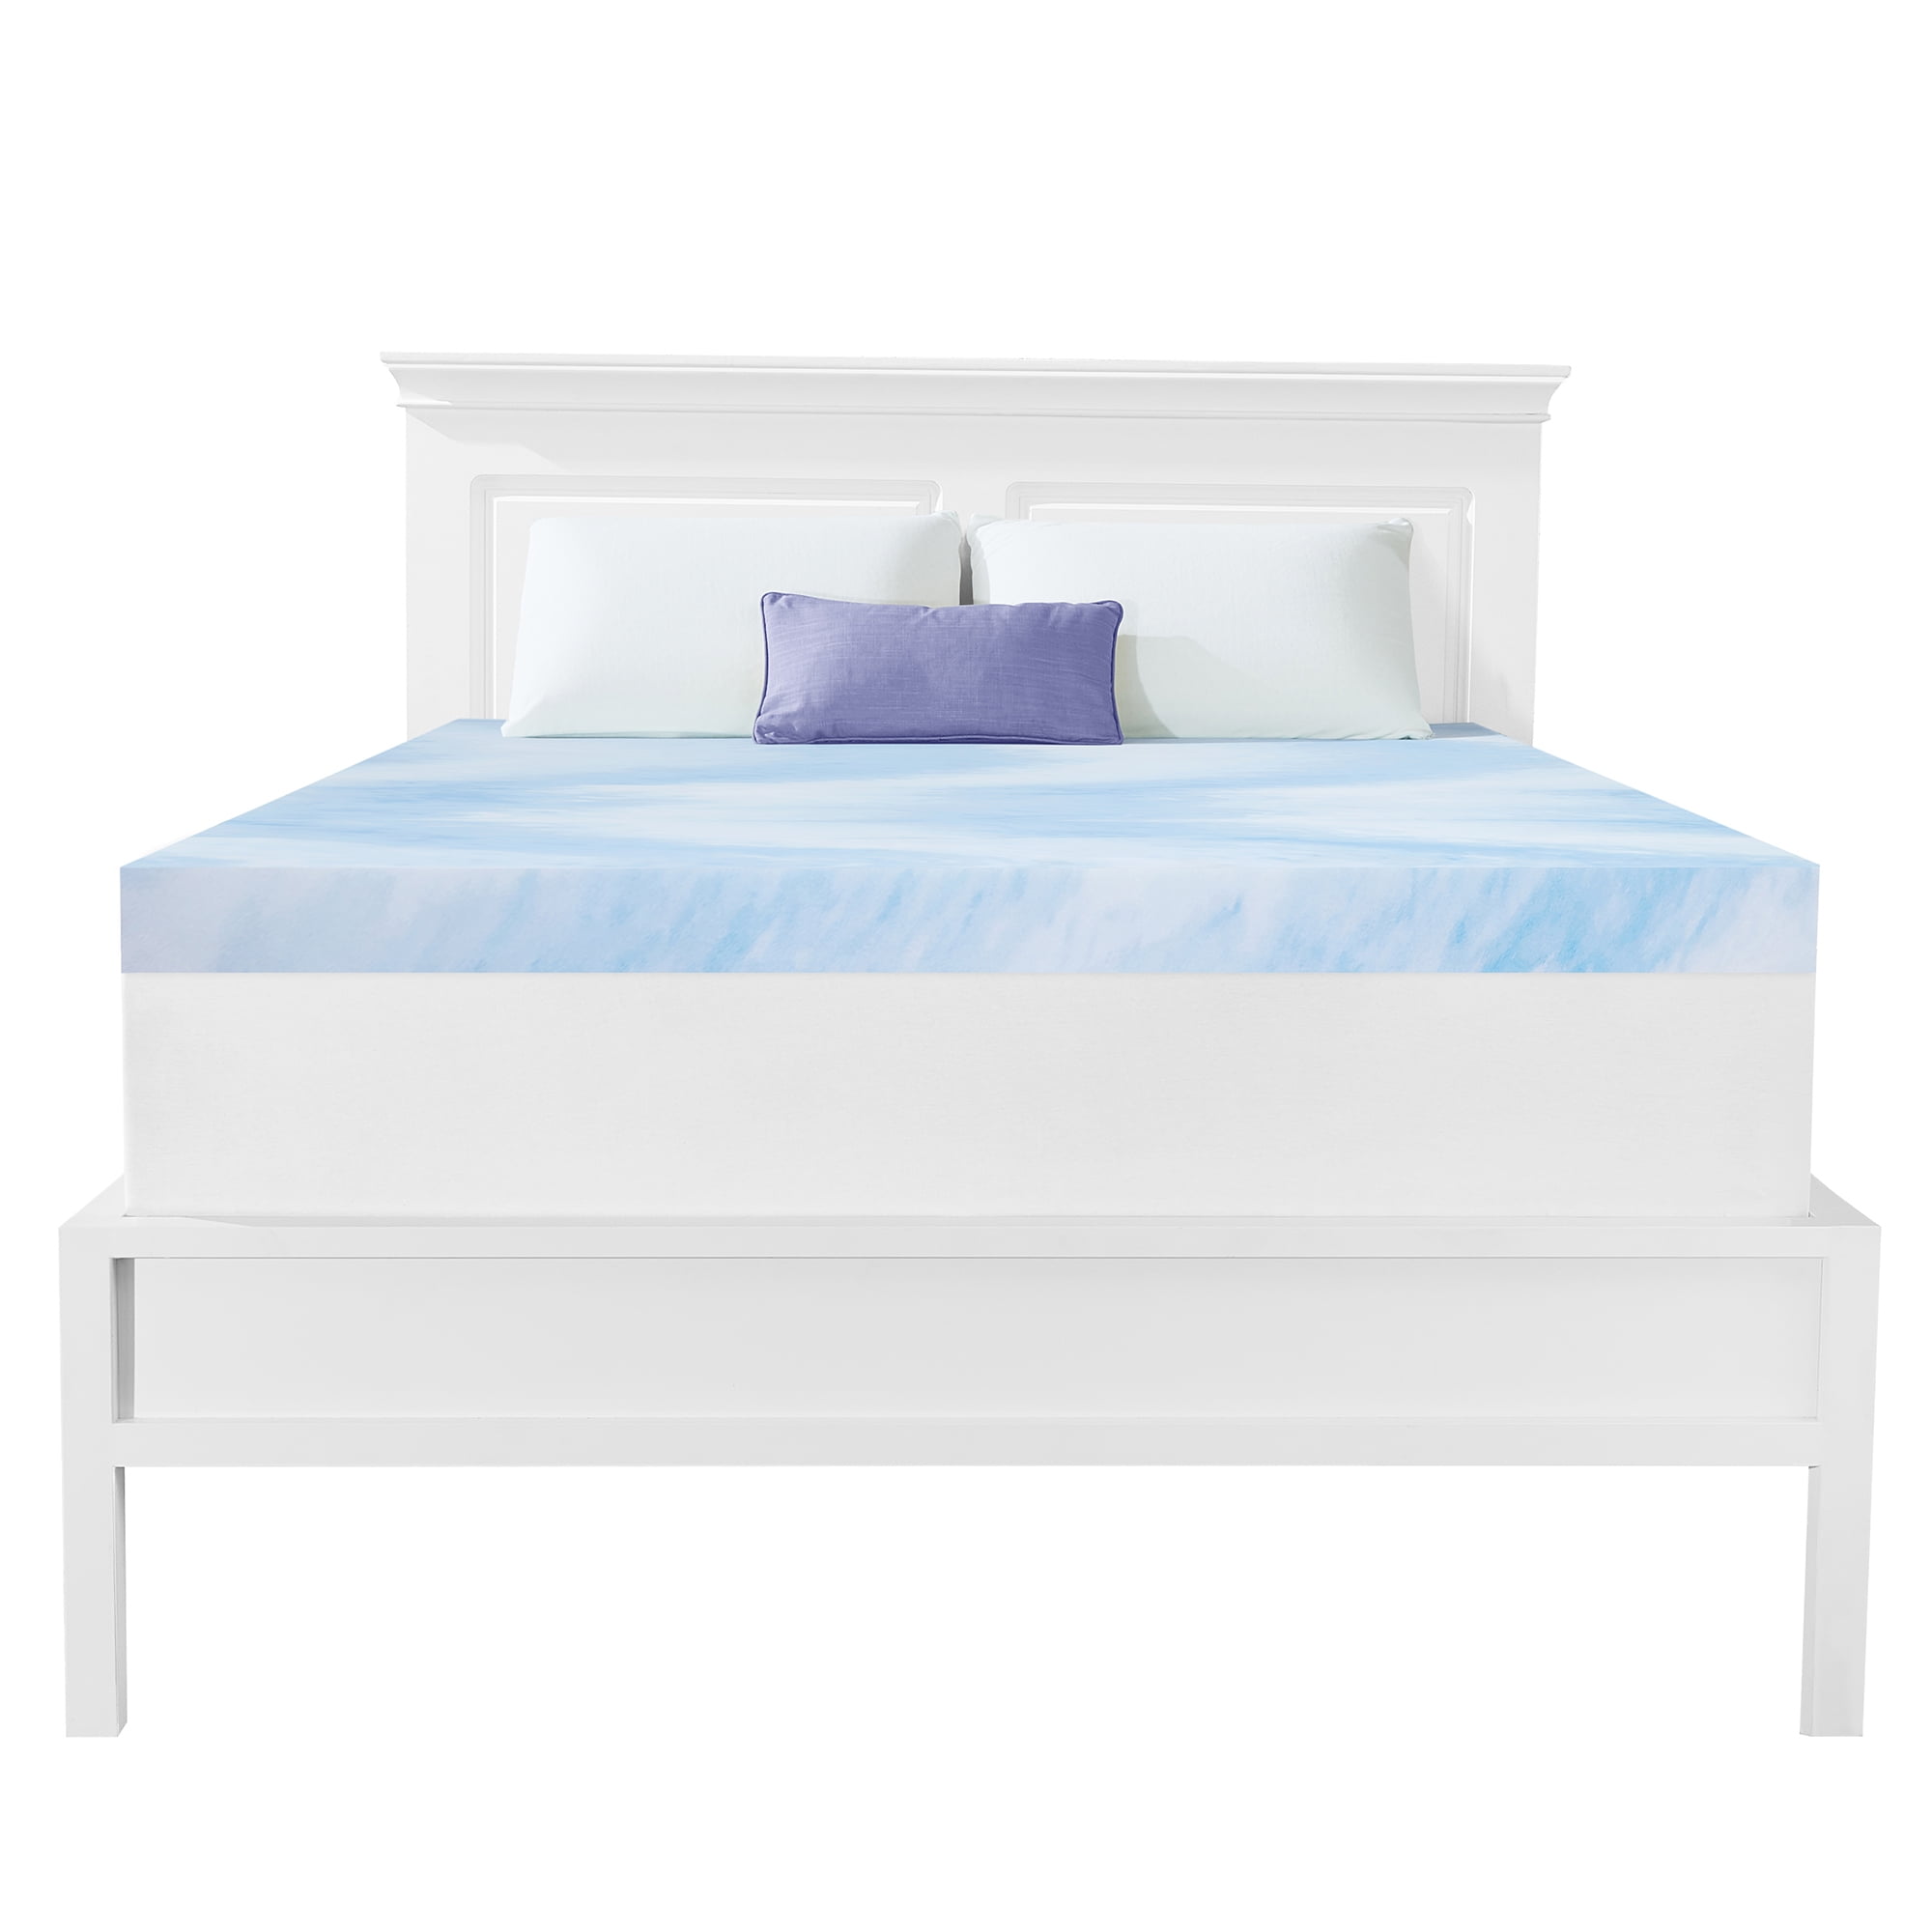 The Dream Bed Cool Mattress Free, Dream Bed Lux Lx640 King